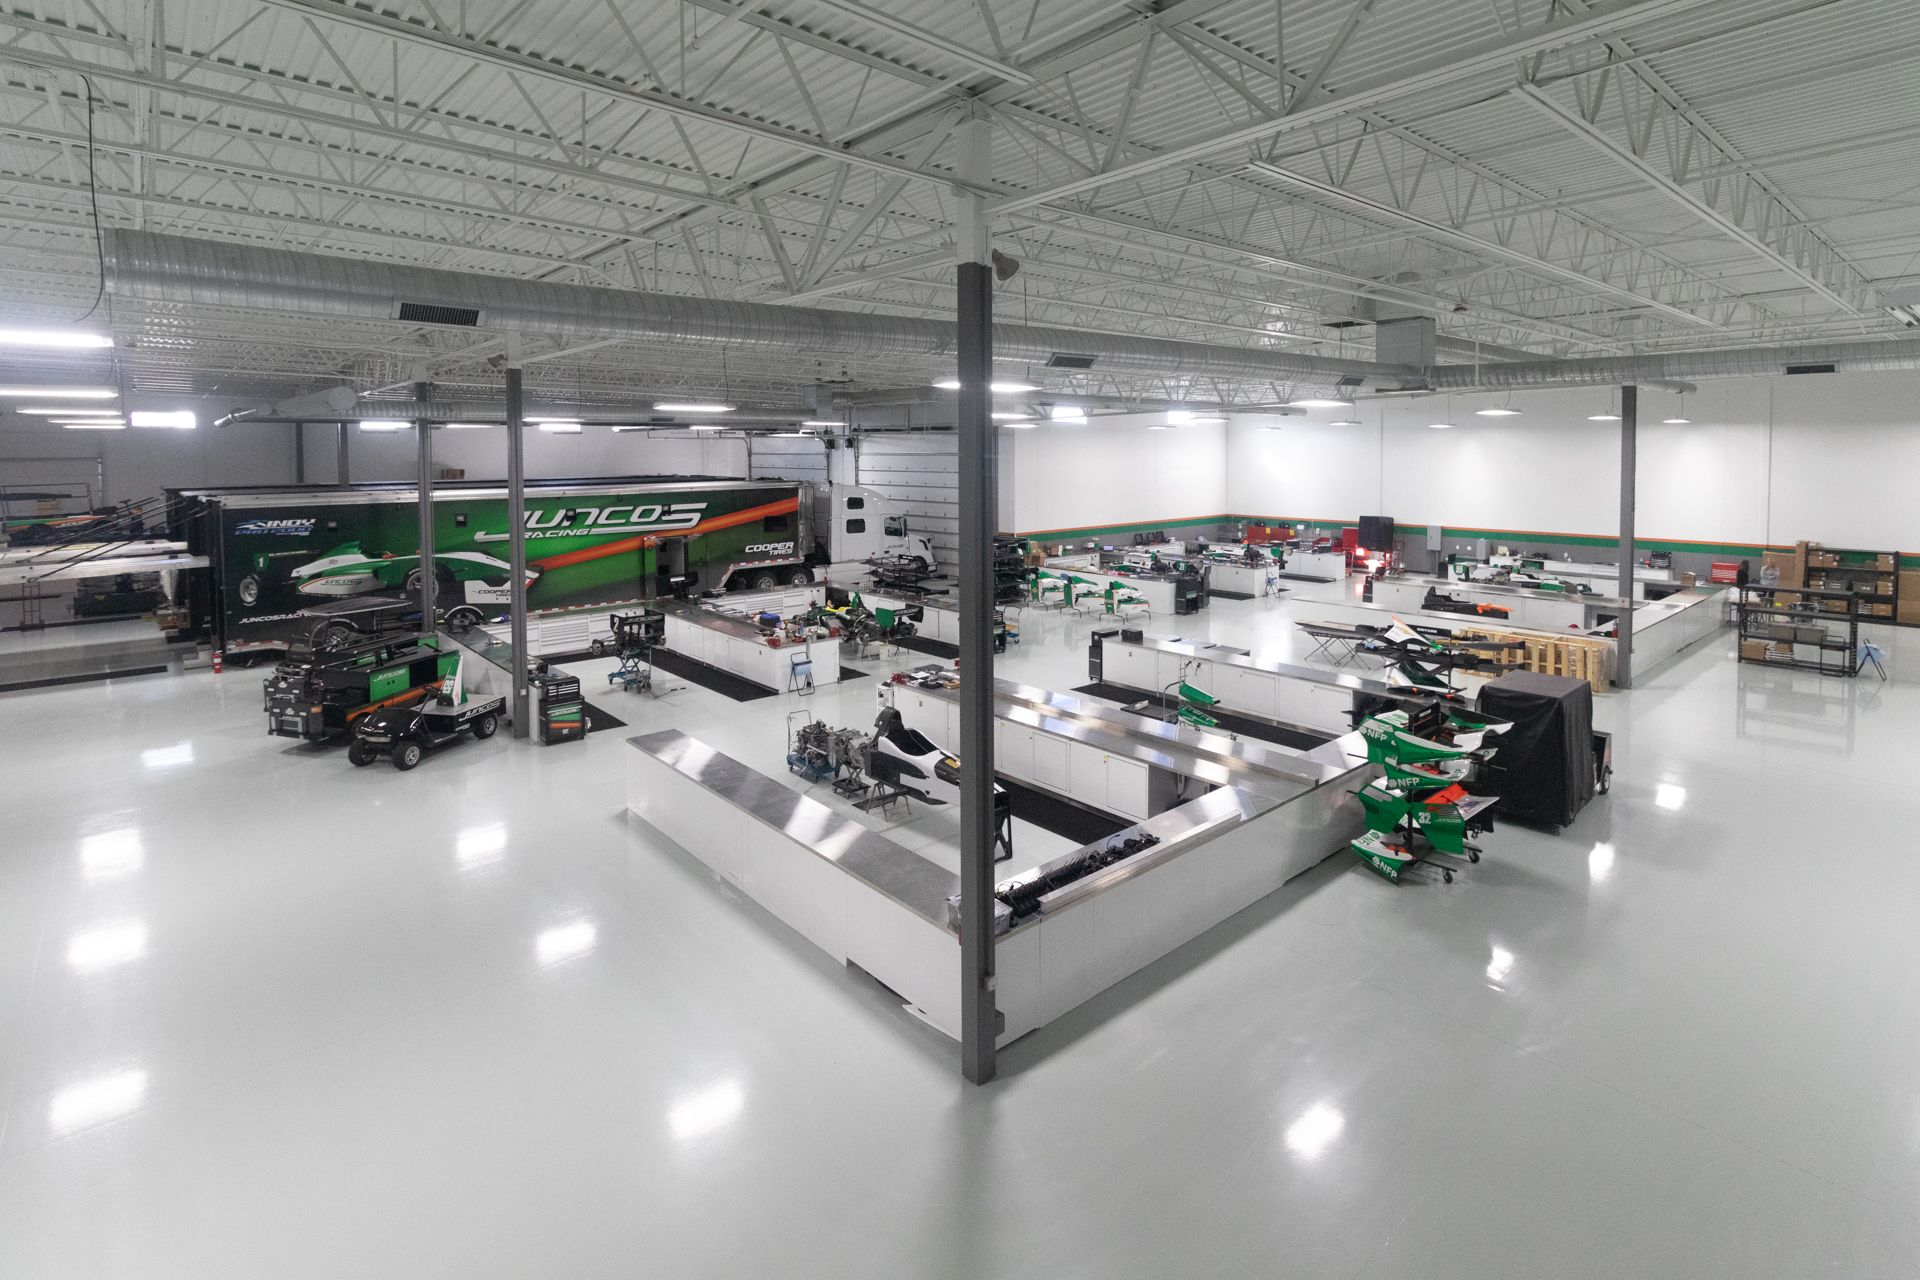 A beautiful clean shop space with room for two transporters and plenty of bays to work on Indy Pro 2000, Indy Lights and IndyCar racing cars, Juncos Hollinger Racing has also prepped IMSA DPi cars here too.